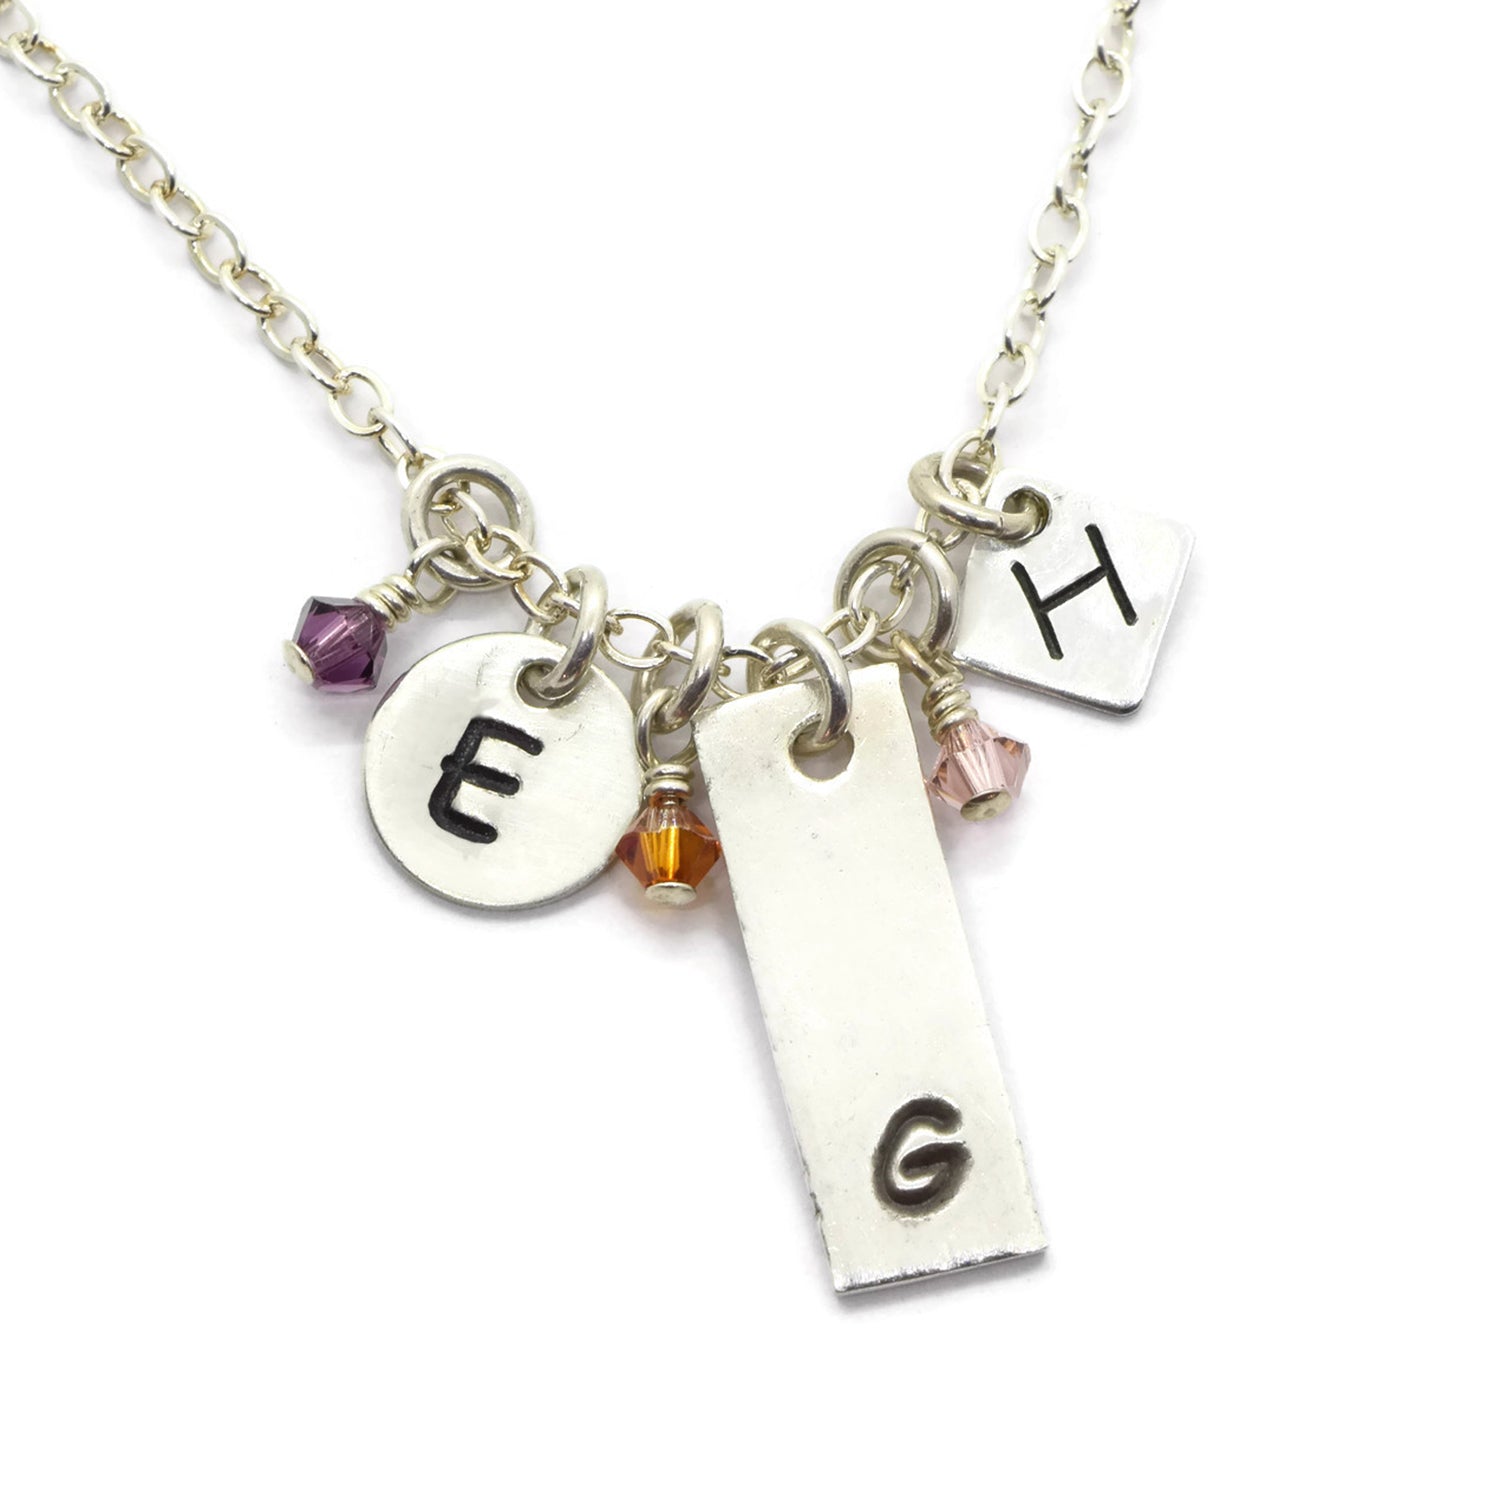 Min-I-nitials Silver Family Necklace - Cloverleaf Jewelry